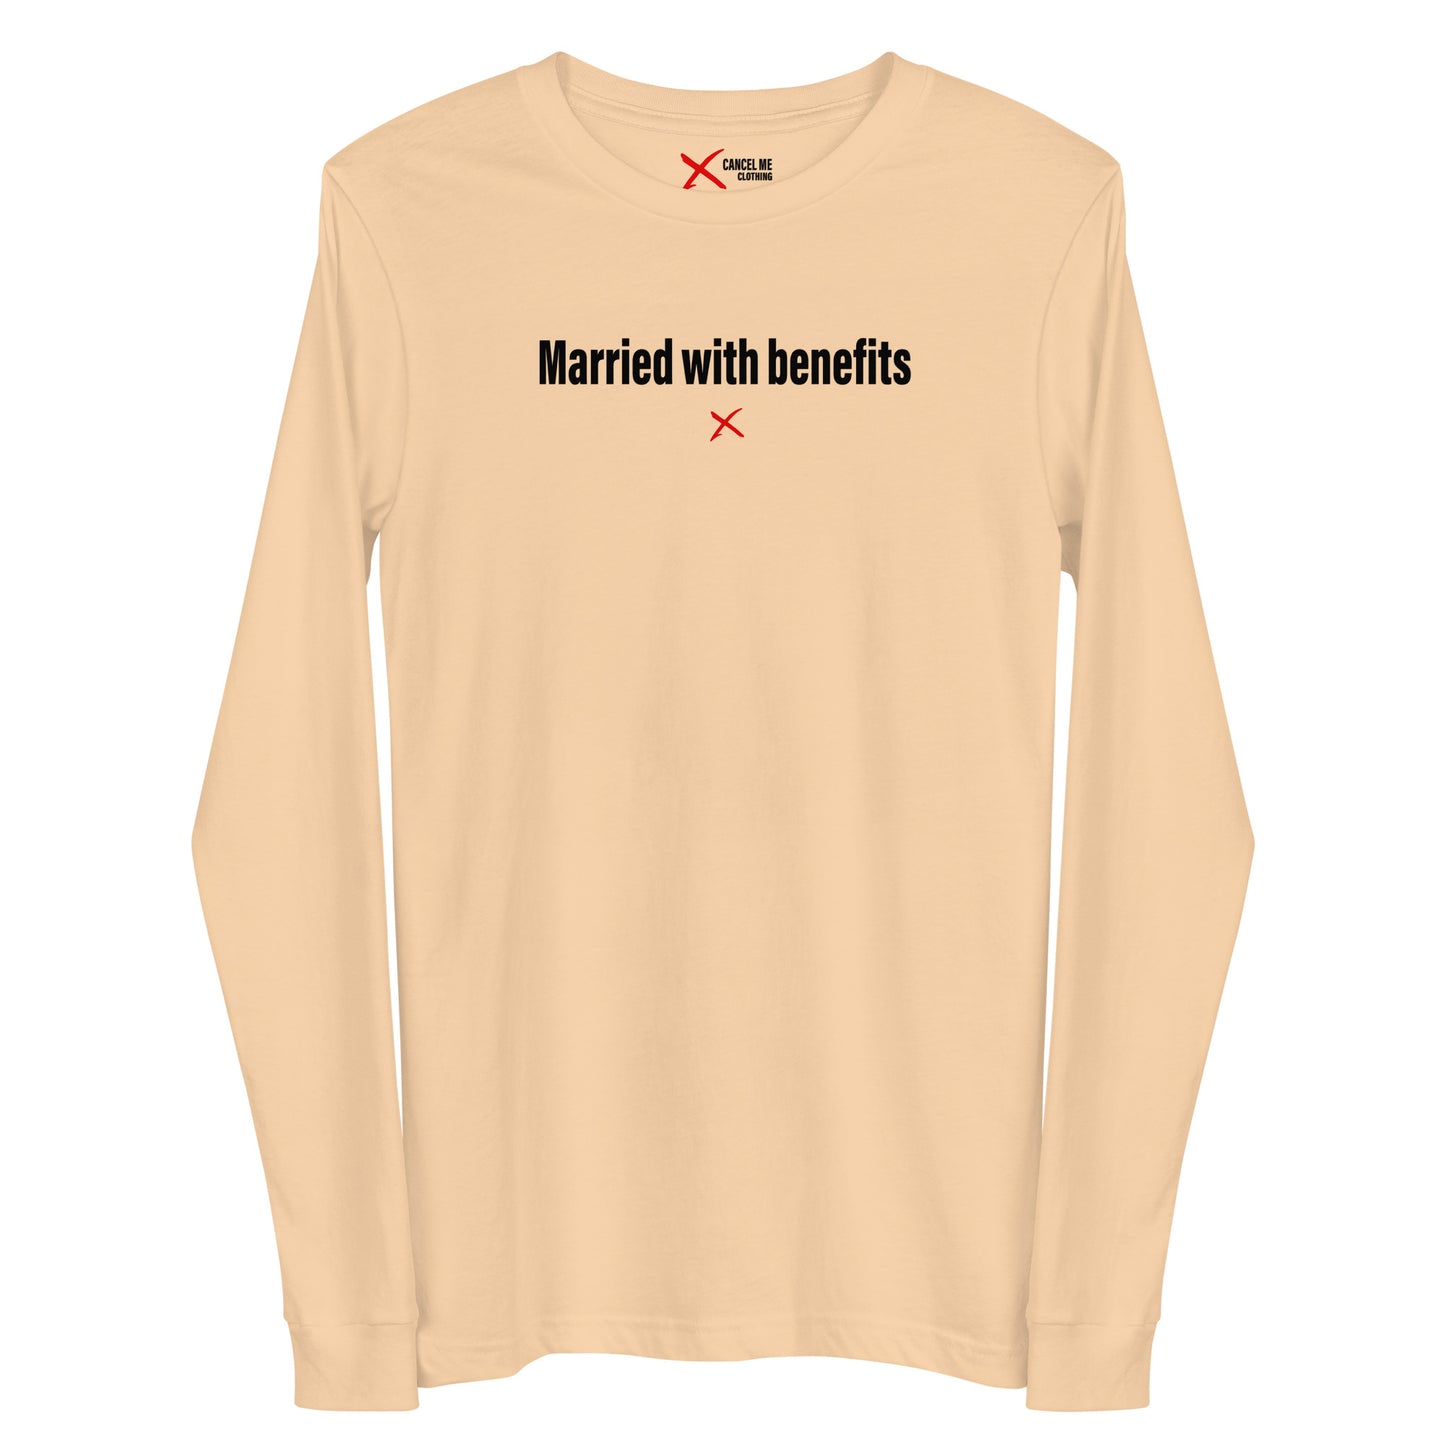 Married with benefits - Longsleeve